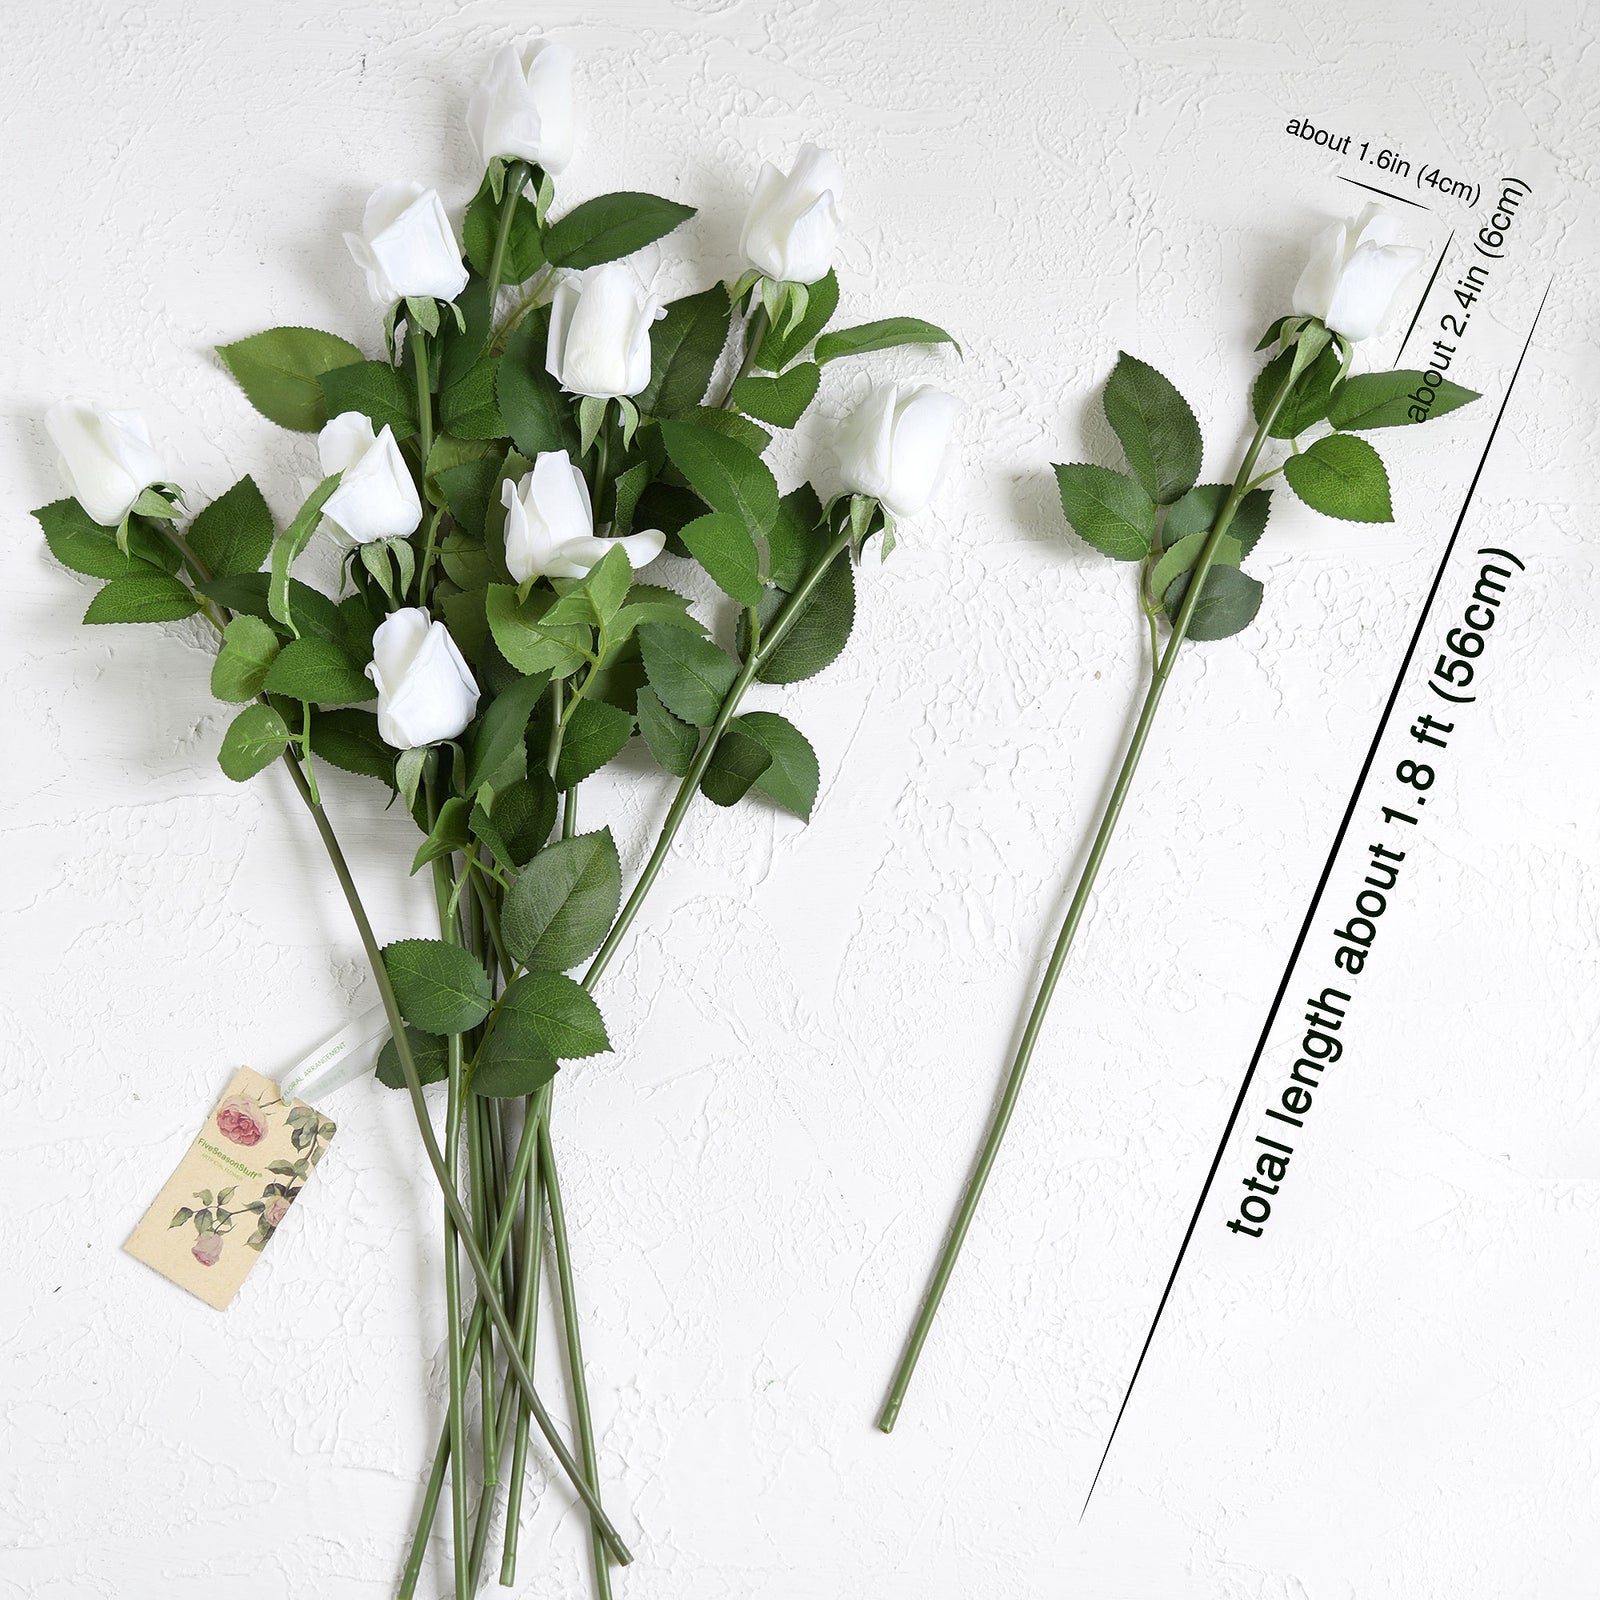 Classic White Long Stem 21 inches Roses Real Touch Silk Artificial Flowers 12 Stems